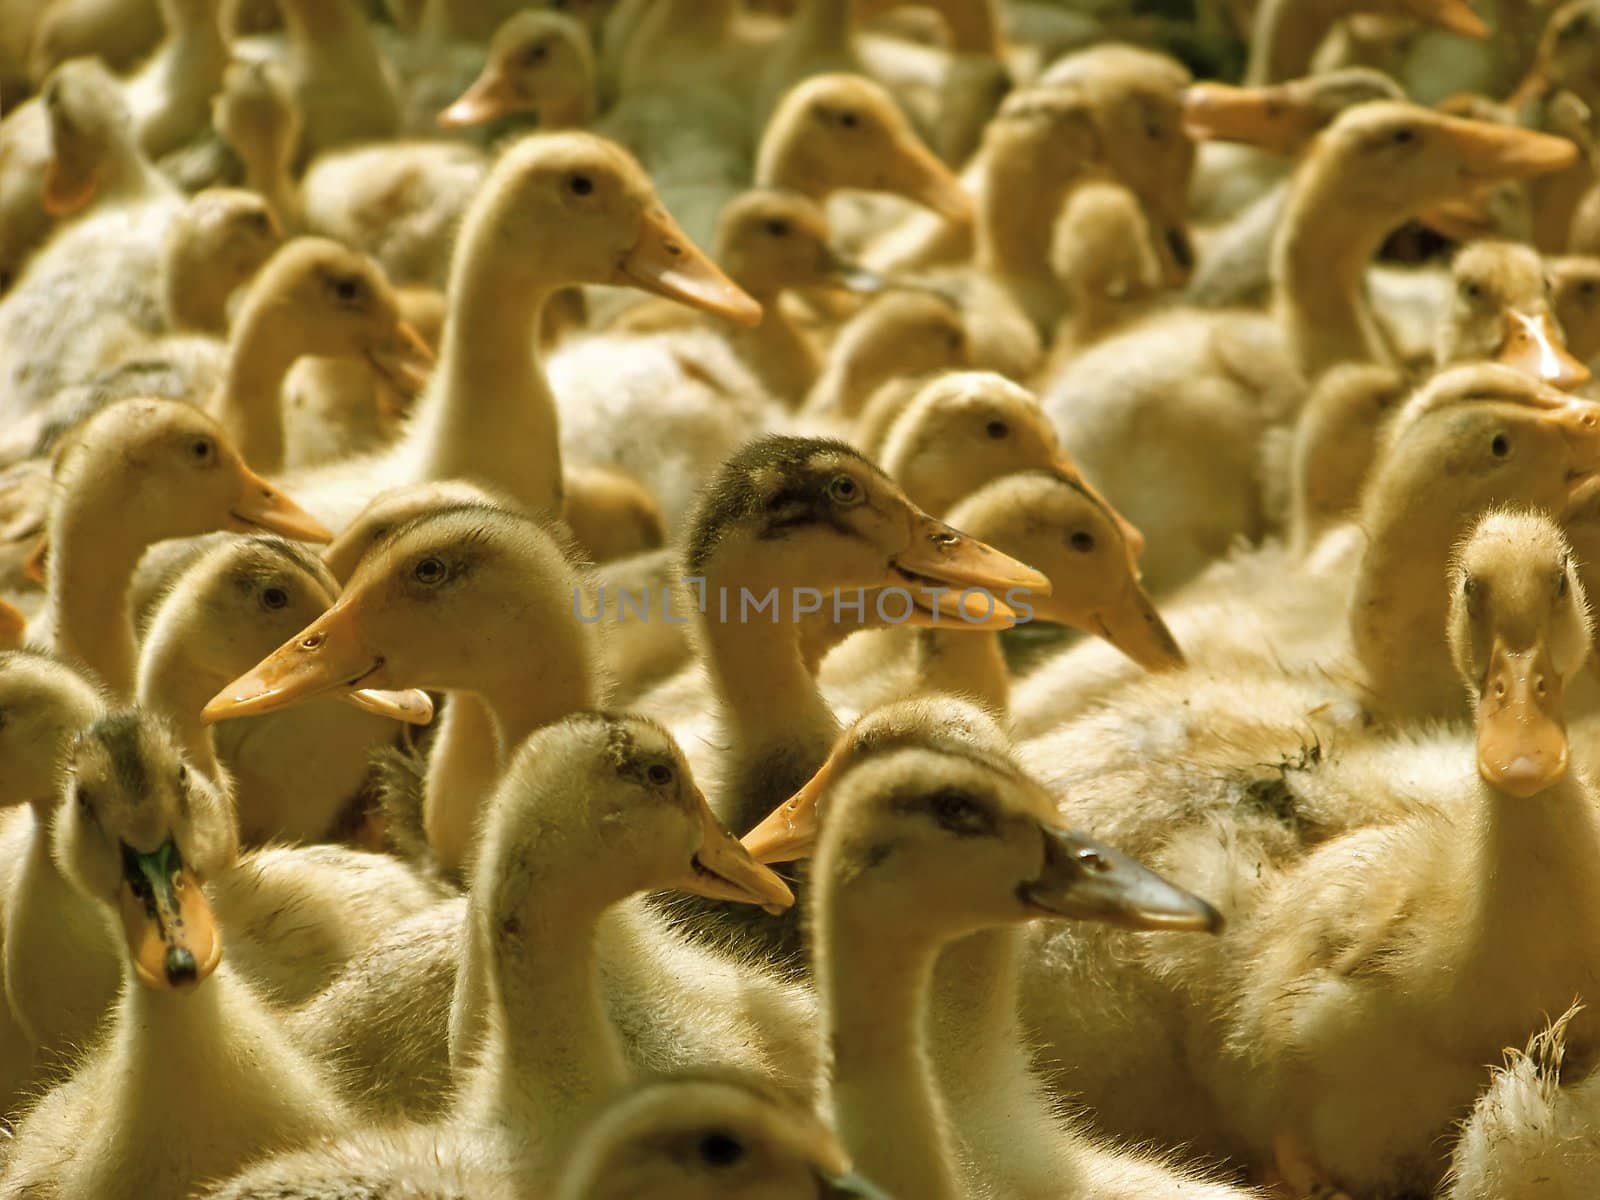 A lot of ducklings by qiiip